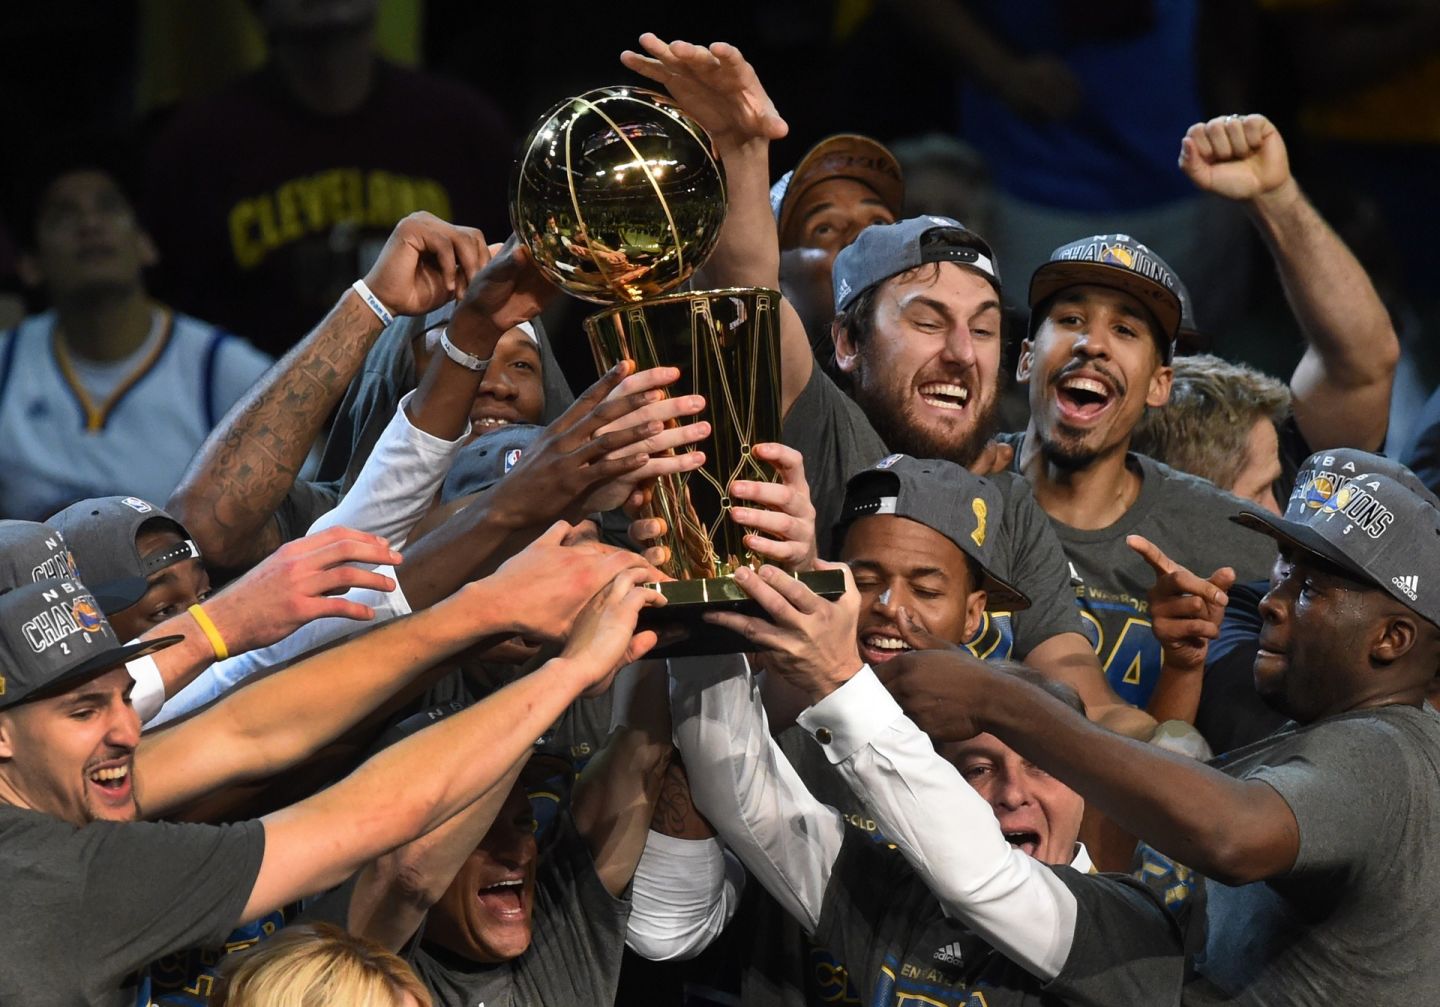 The Warriors celebrate their 2015 NBA Championship. (Timothy A. Clary/AFP/Getty Images)